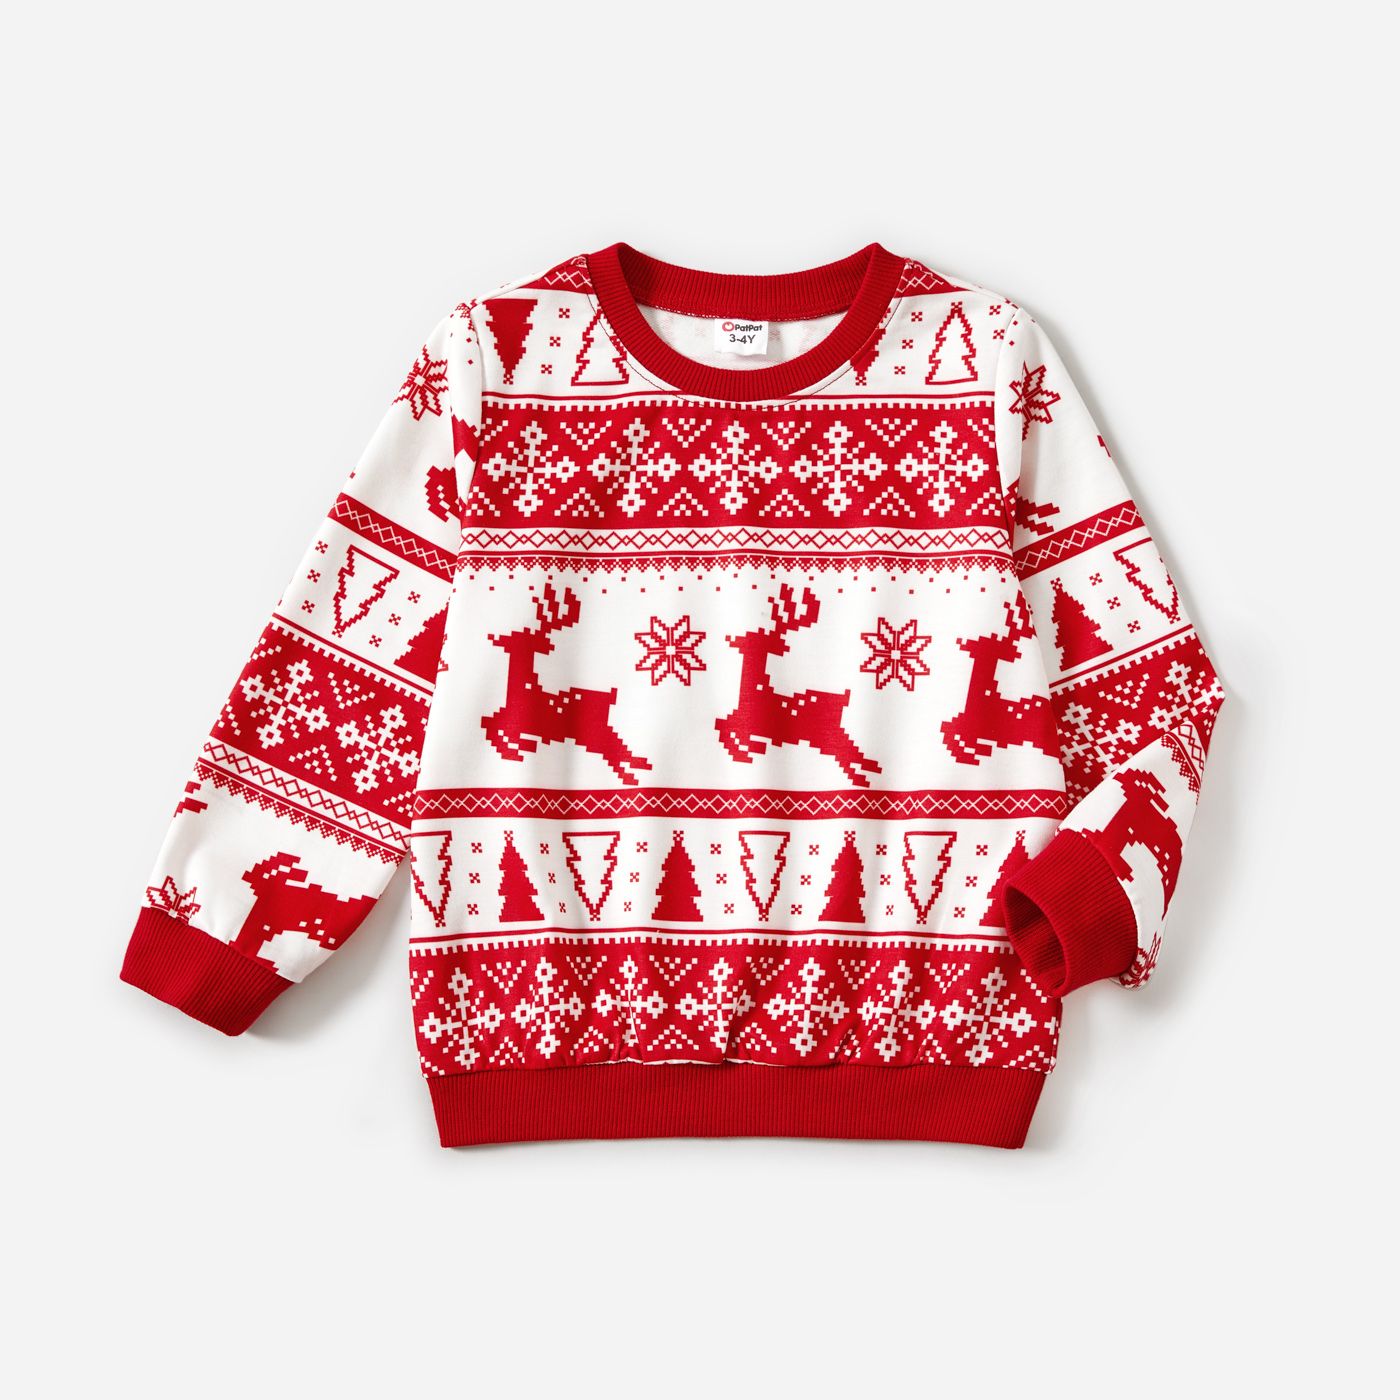 Christmas Family Matching Reindeer All-over Print Long-sleeve Tops